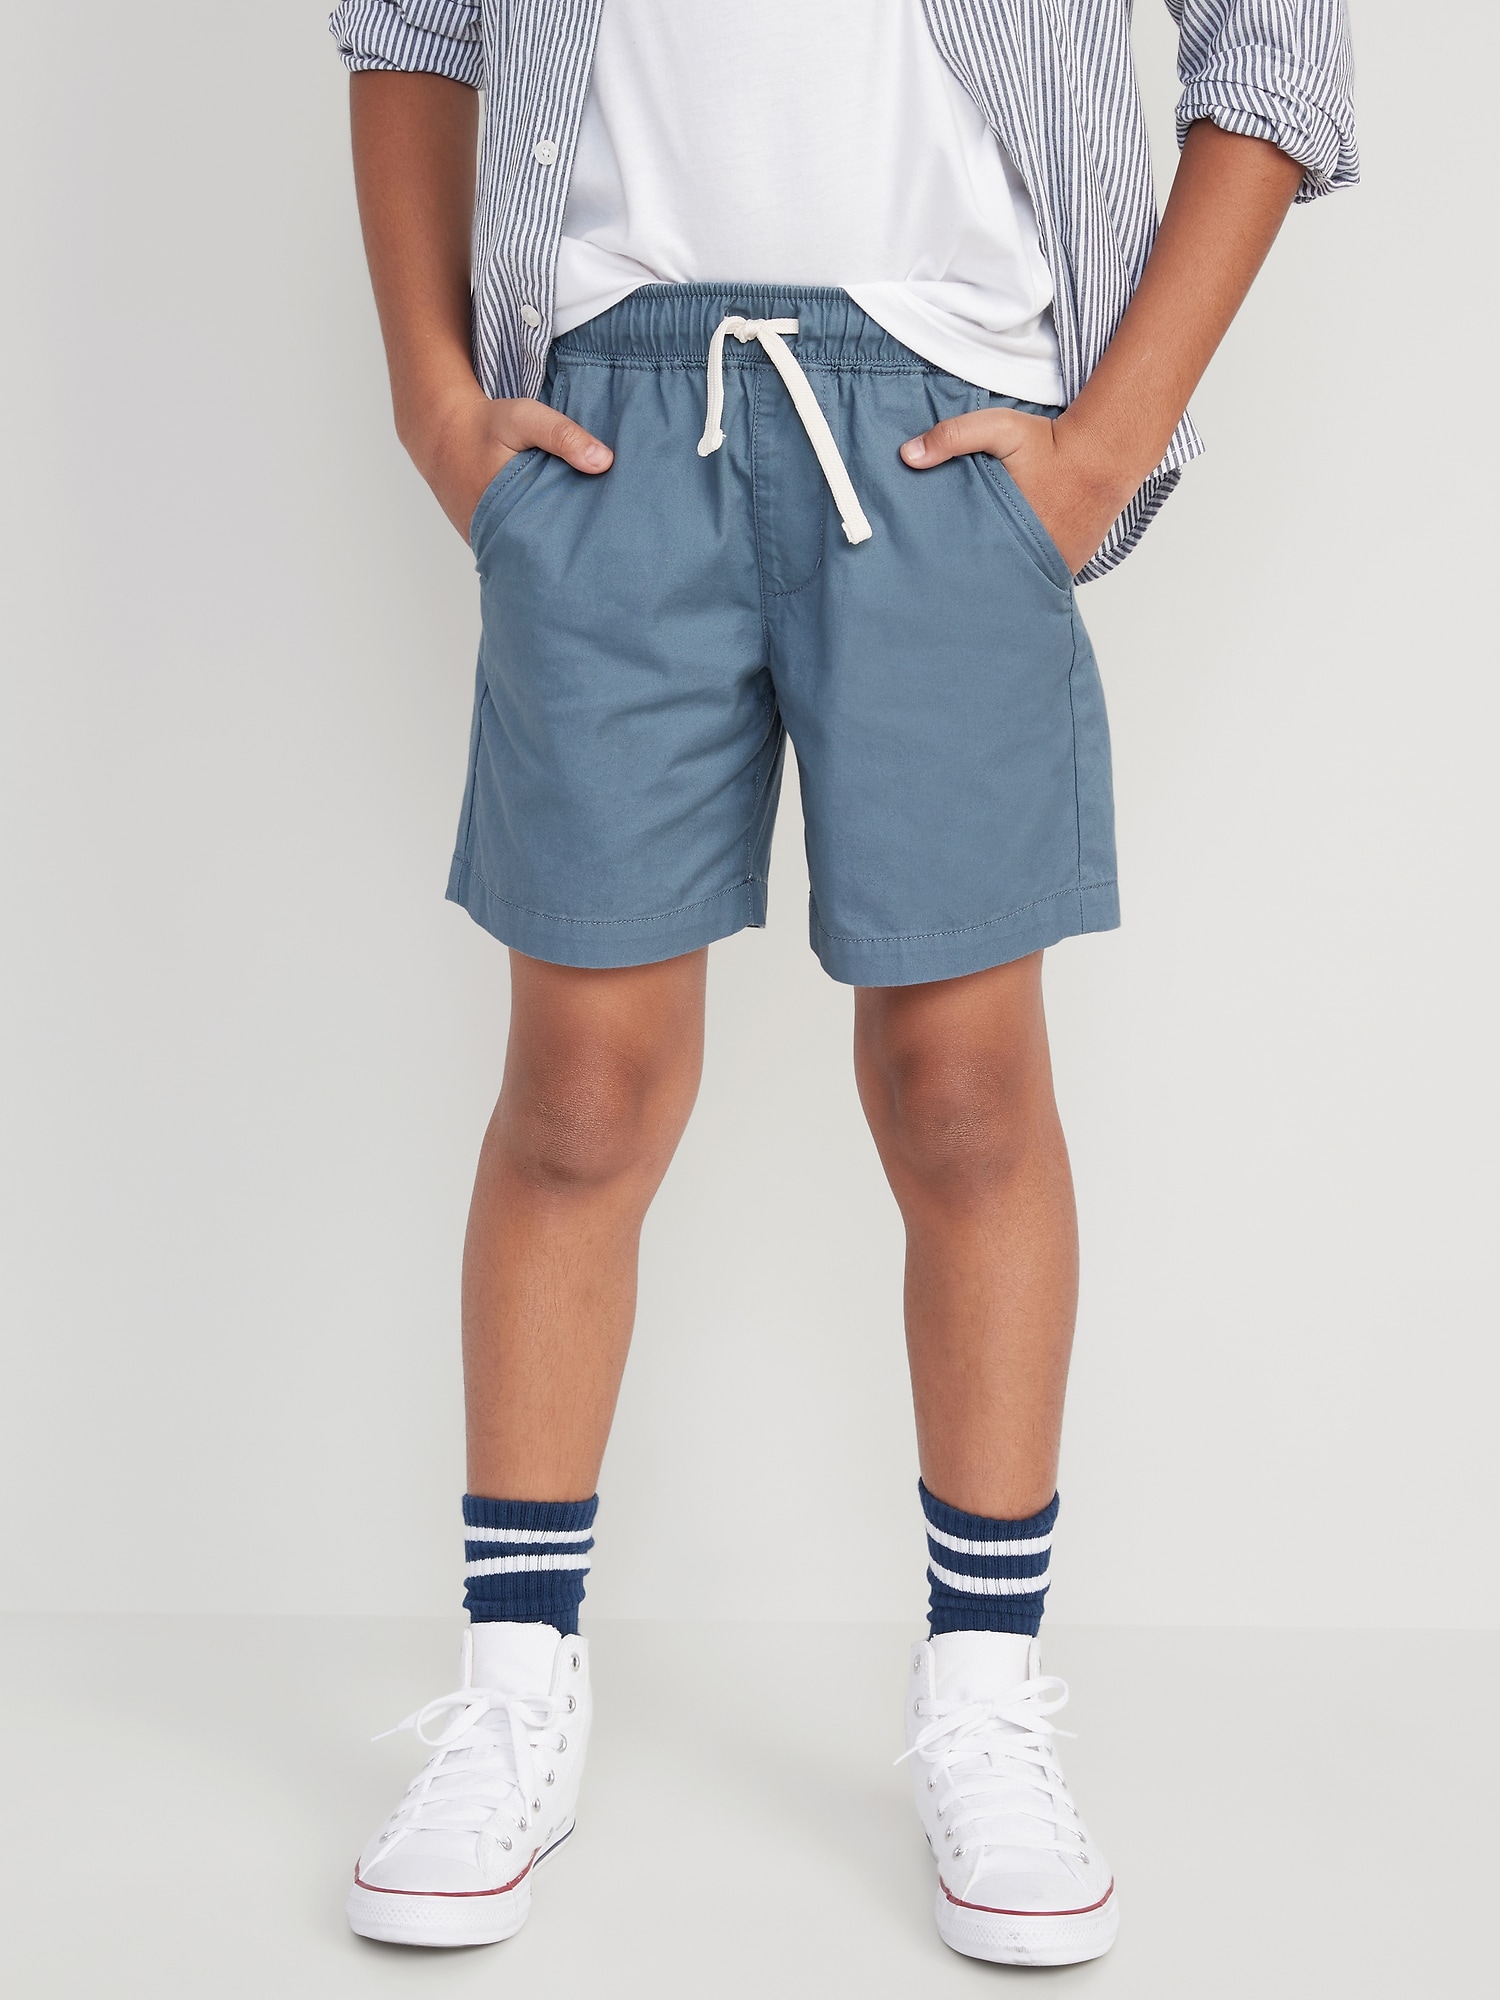 klip Bære Stipendium Twill Non-Stretch Jogger Shorts for Boys (Above Knee) | Old Navy